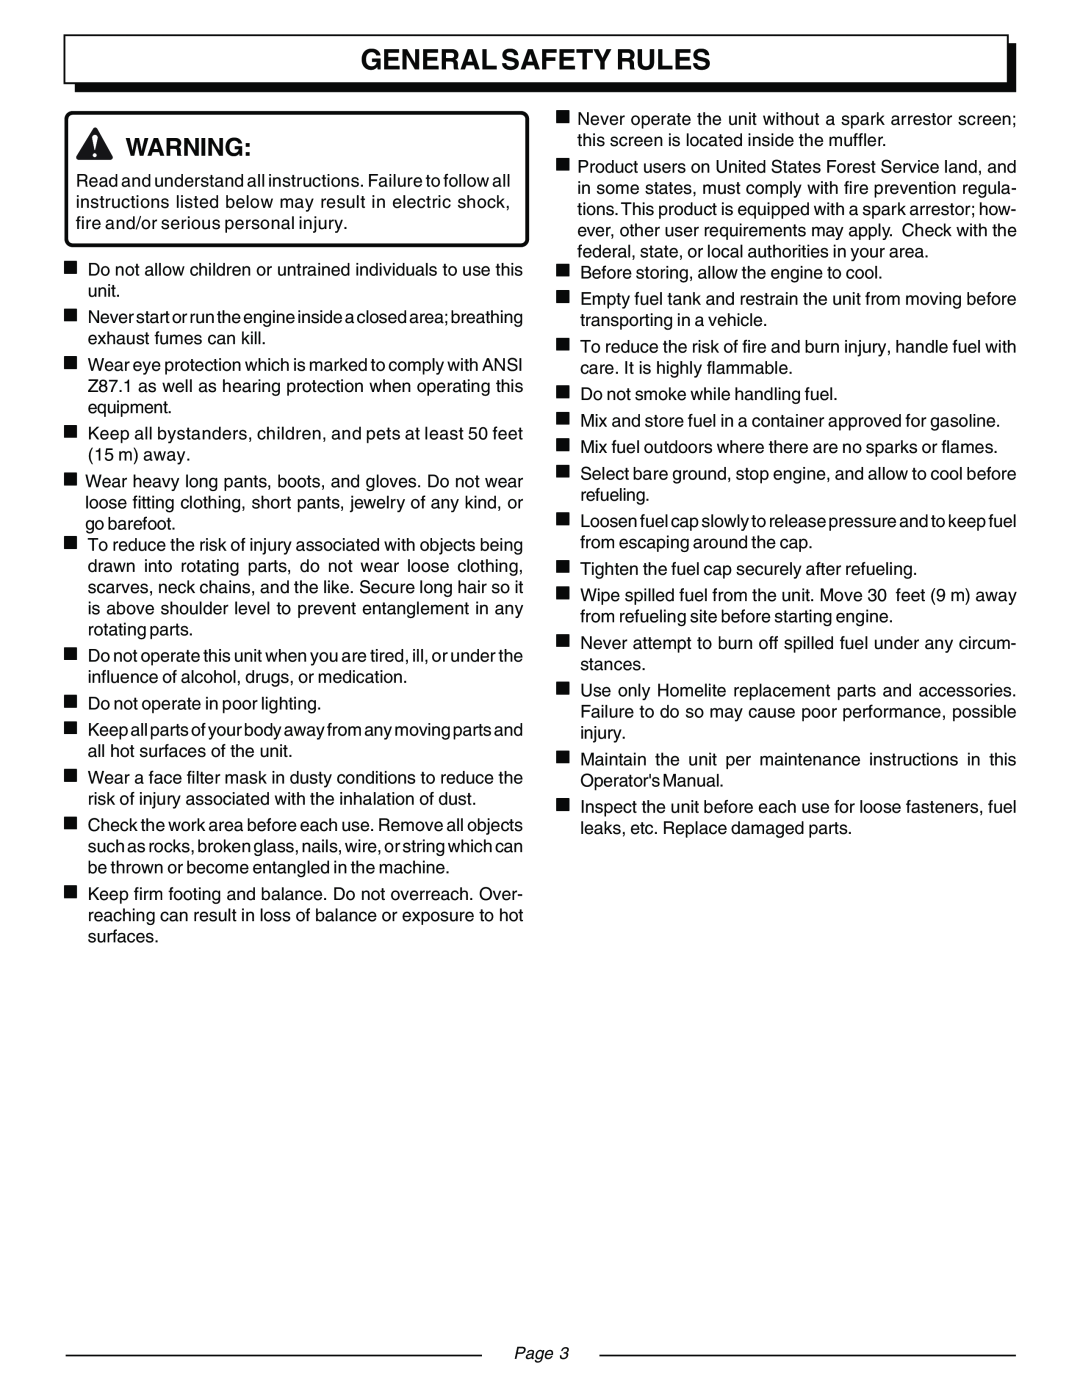 Homelite ZR08107 manual General Safety Rules, Page 